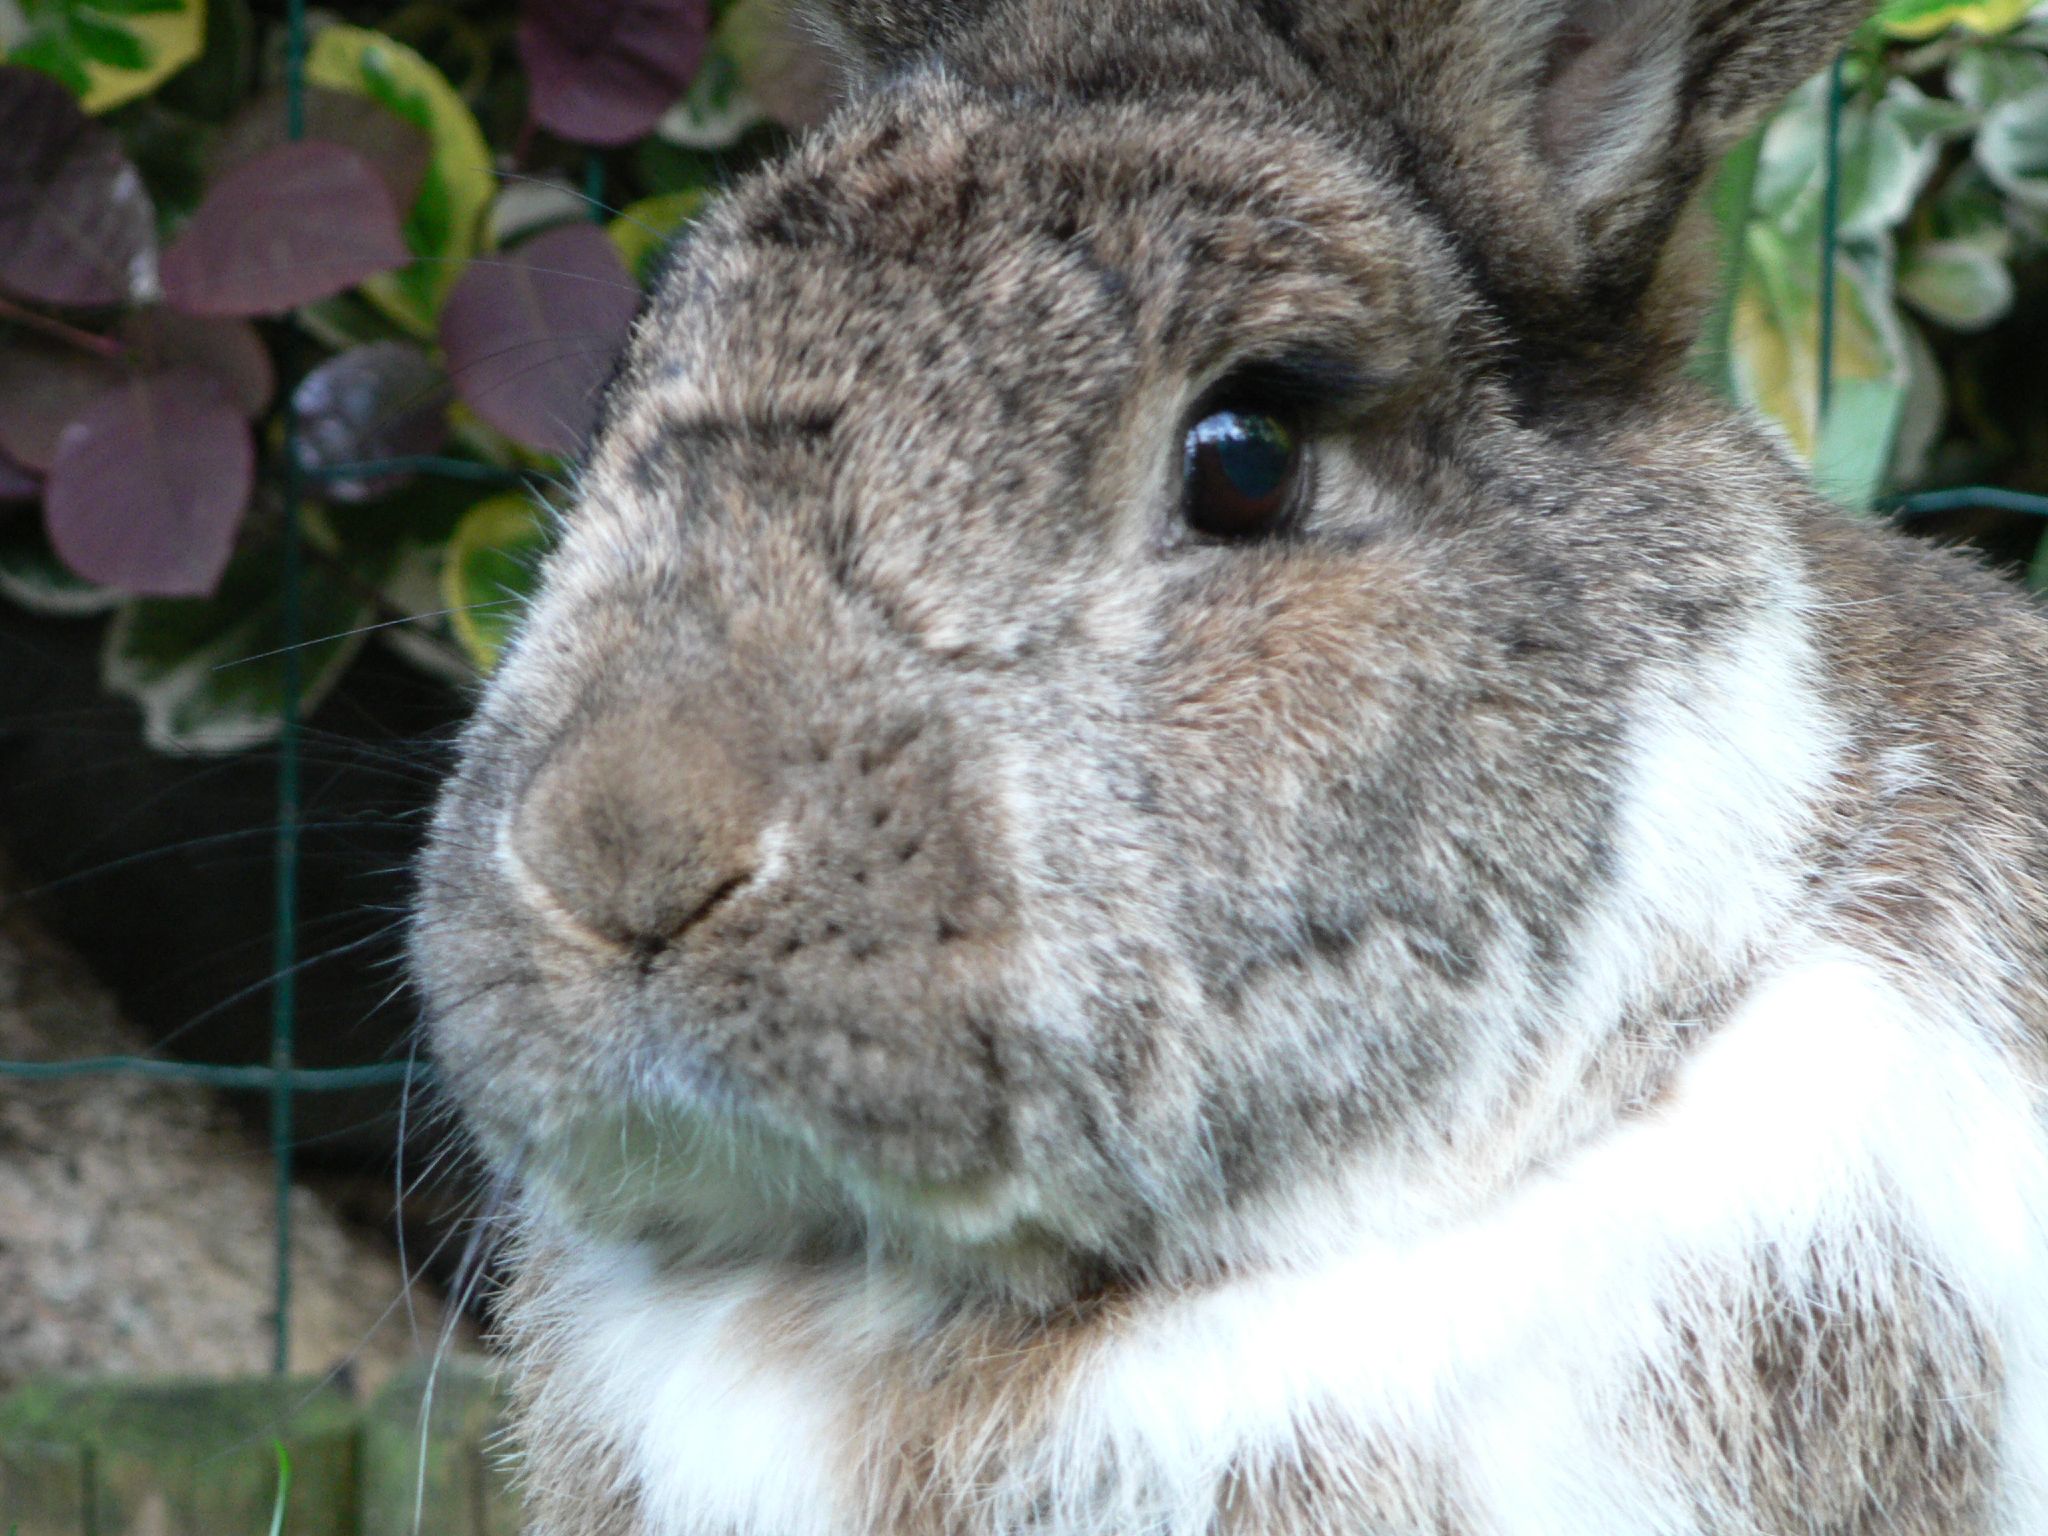 a close up of a brown and white bunny